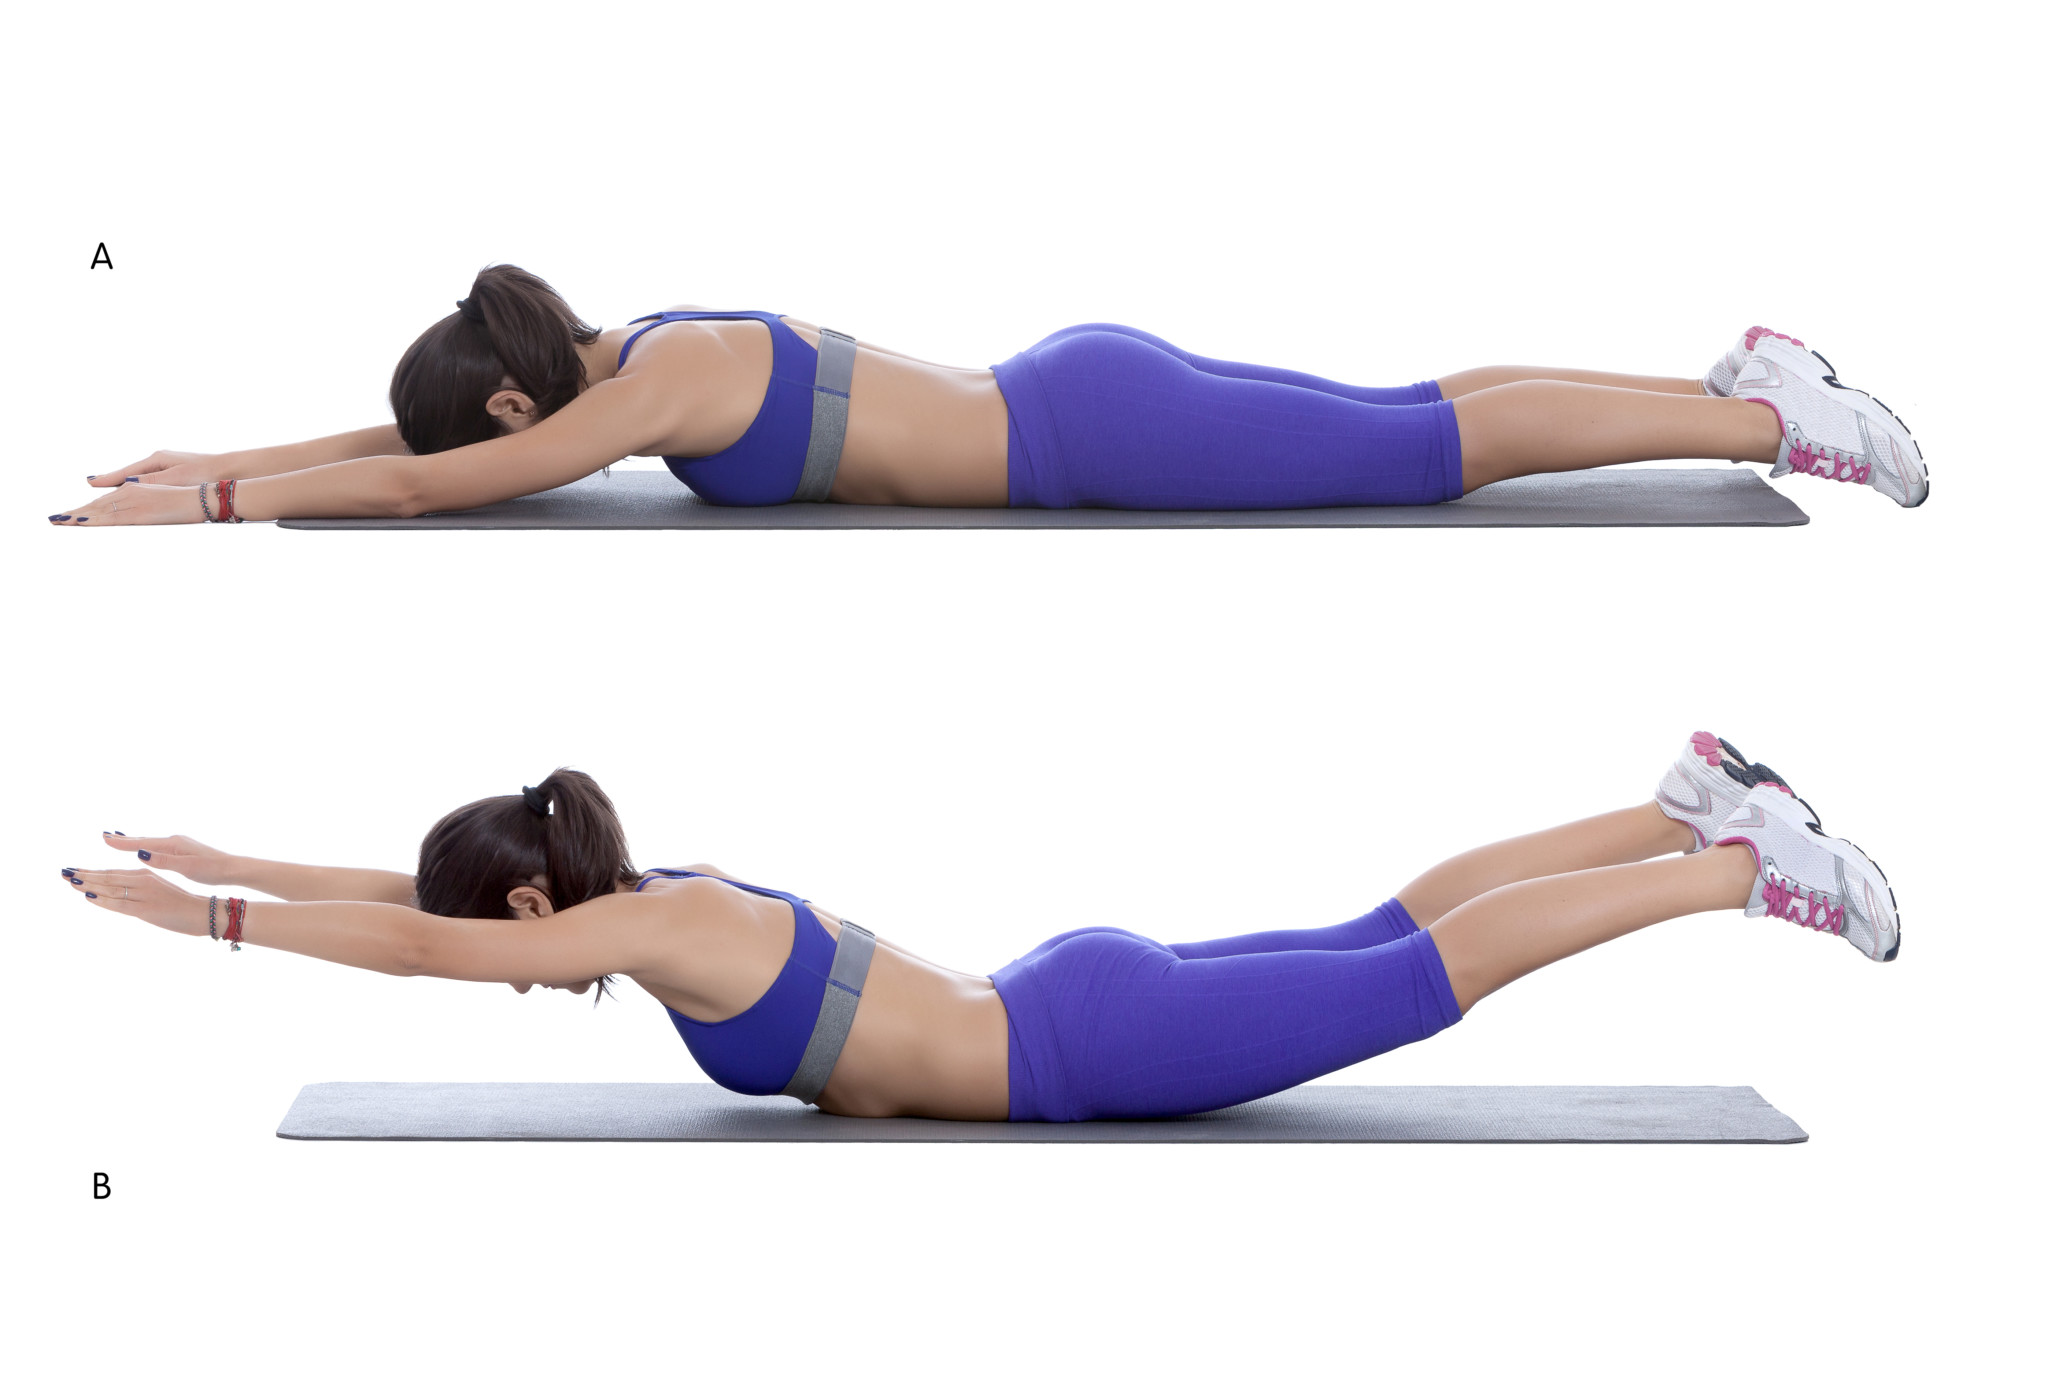 Step by step instructions: Lie face down on the floor, with your arms and legs extended, so your body forms a straight line. (A) Keeping your head and neck in a neutral position, simultaneously lift your arms and legs up toward the ceiling to form a gentle curve with your body. (B)